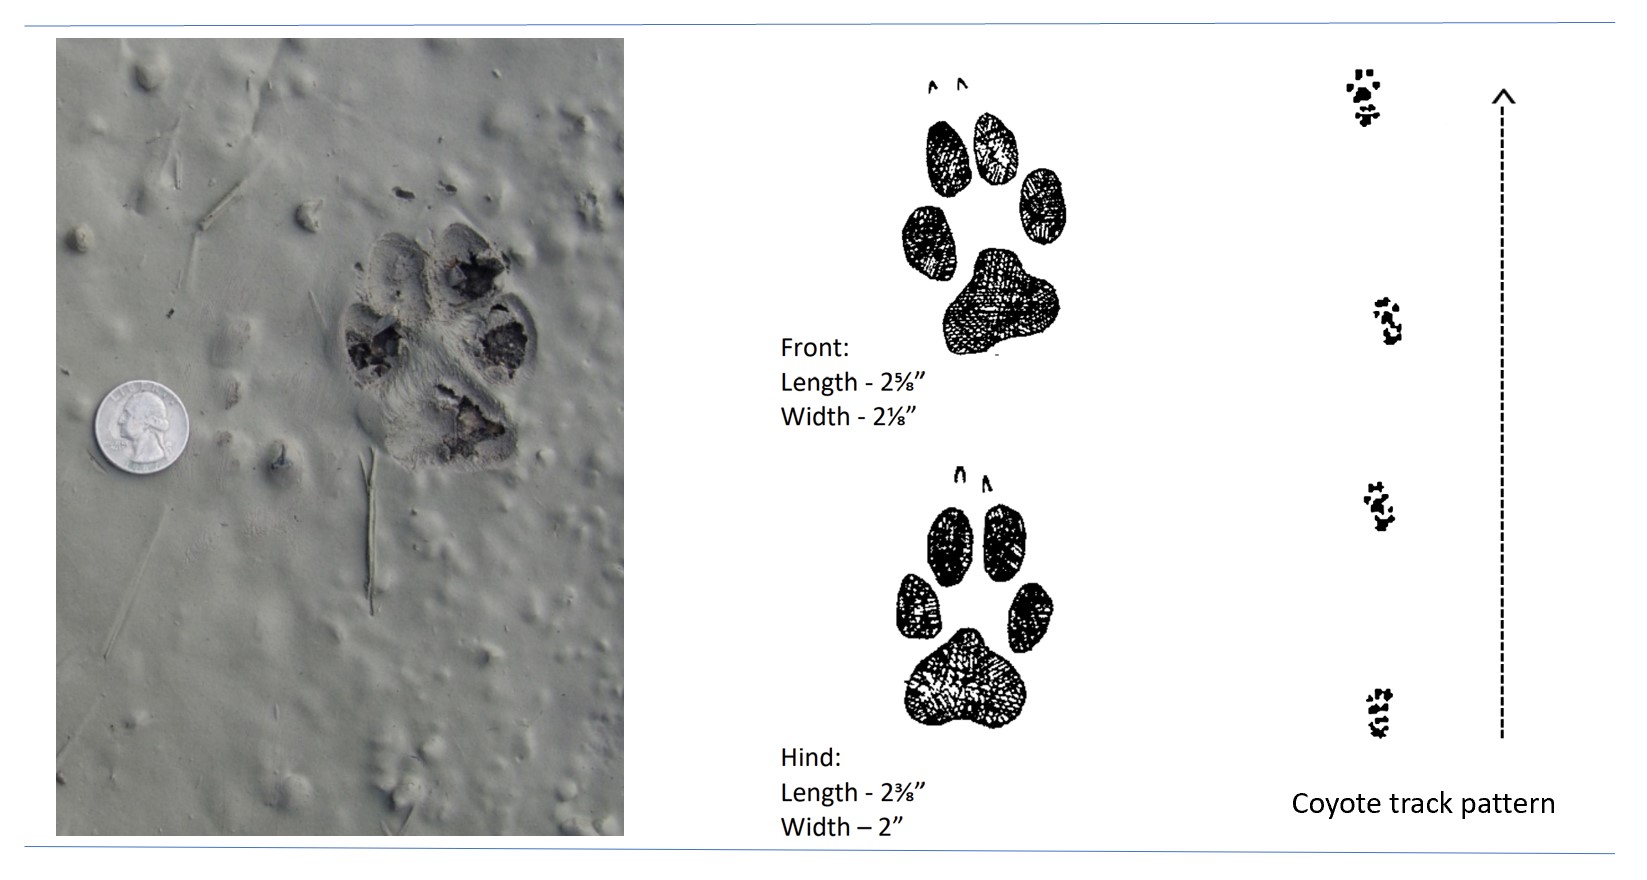 Photo and illustrated tracks of a coyote.